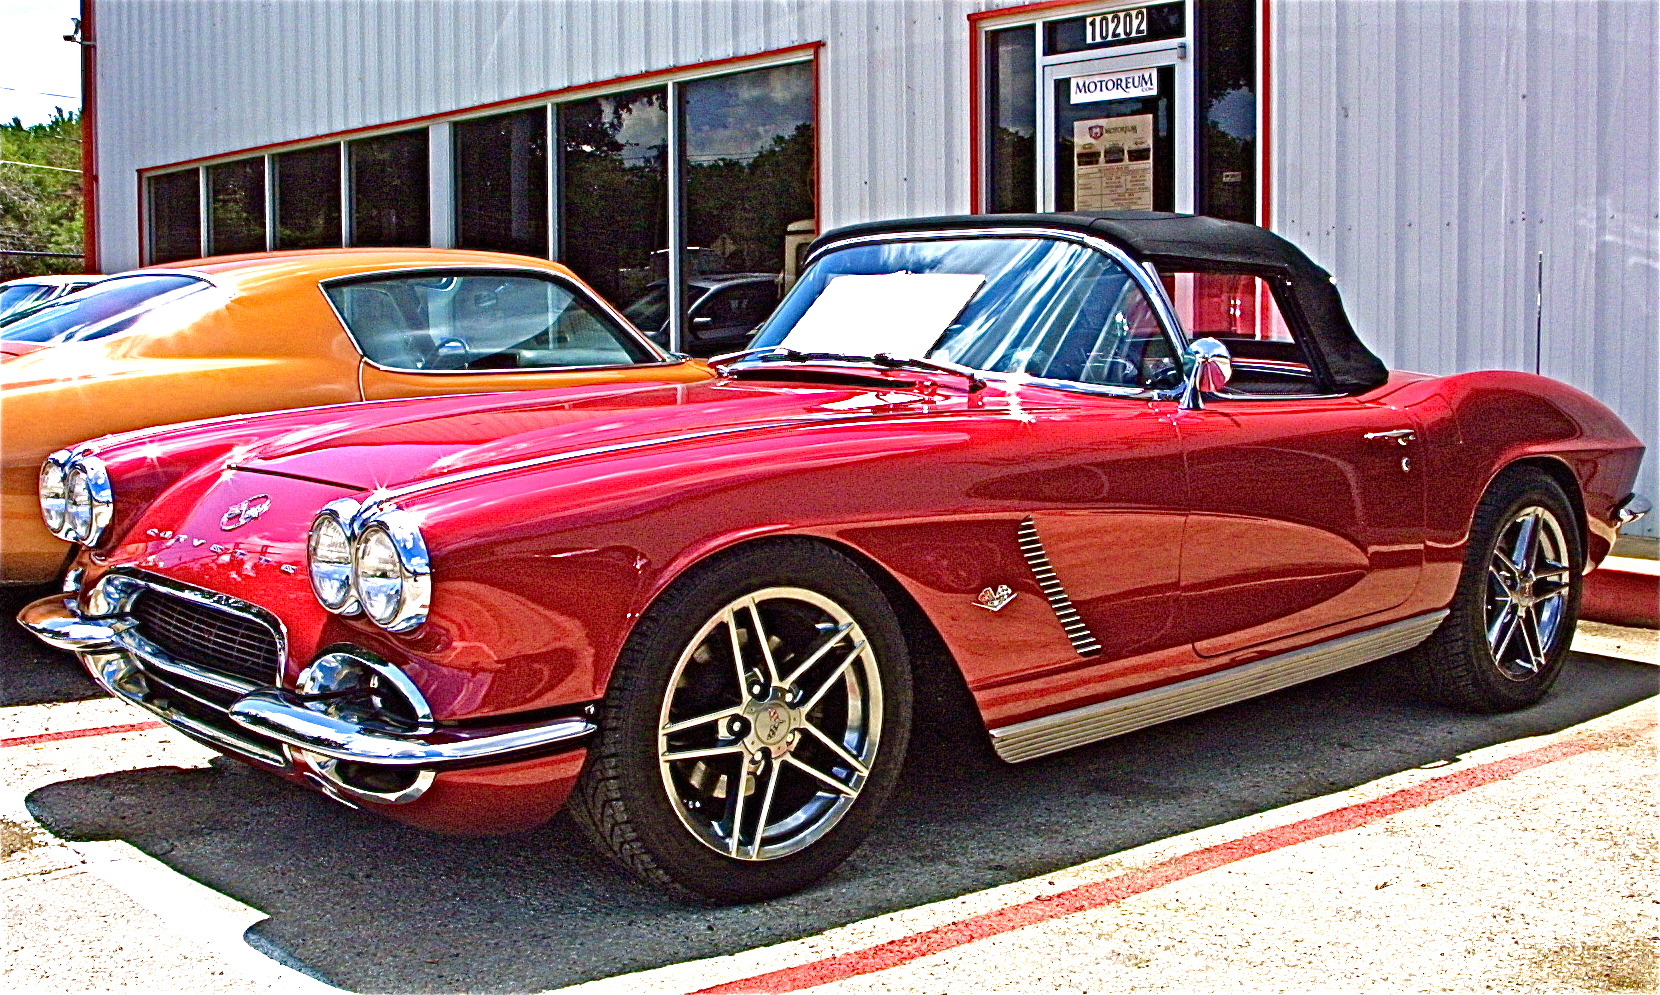 candy red corvette at motoreum***